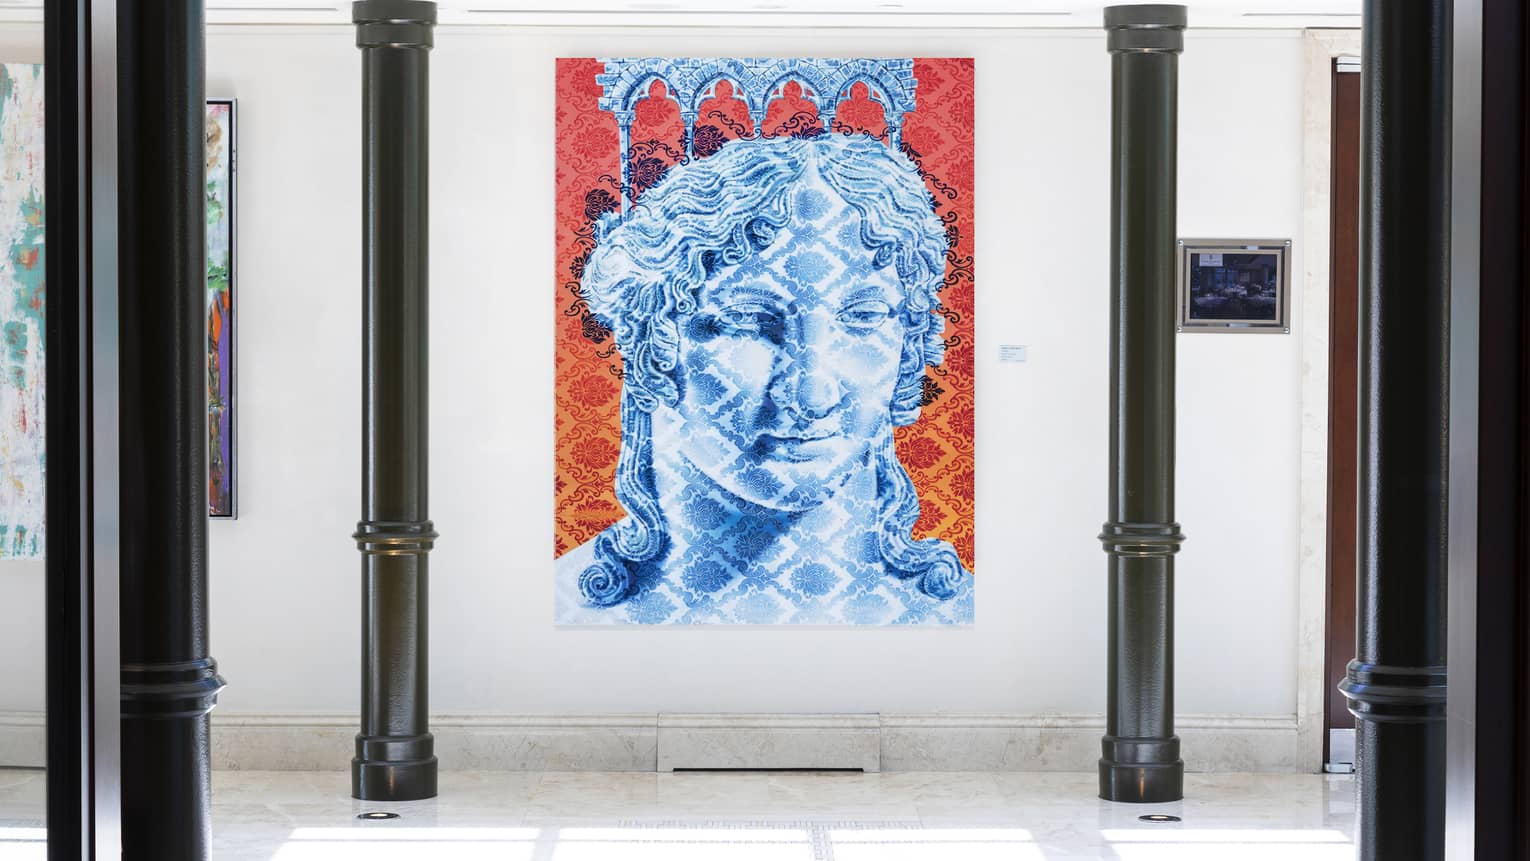 Modern lobby with black pillars and blue, red and white portrait painting